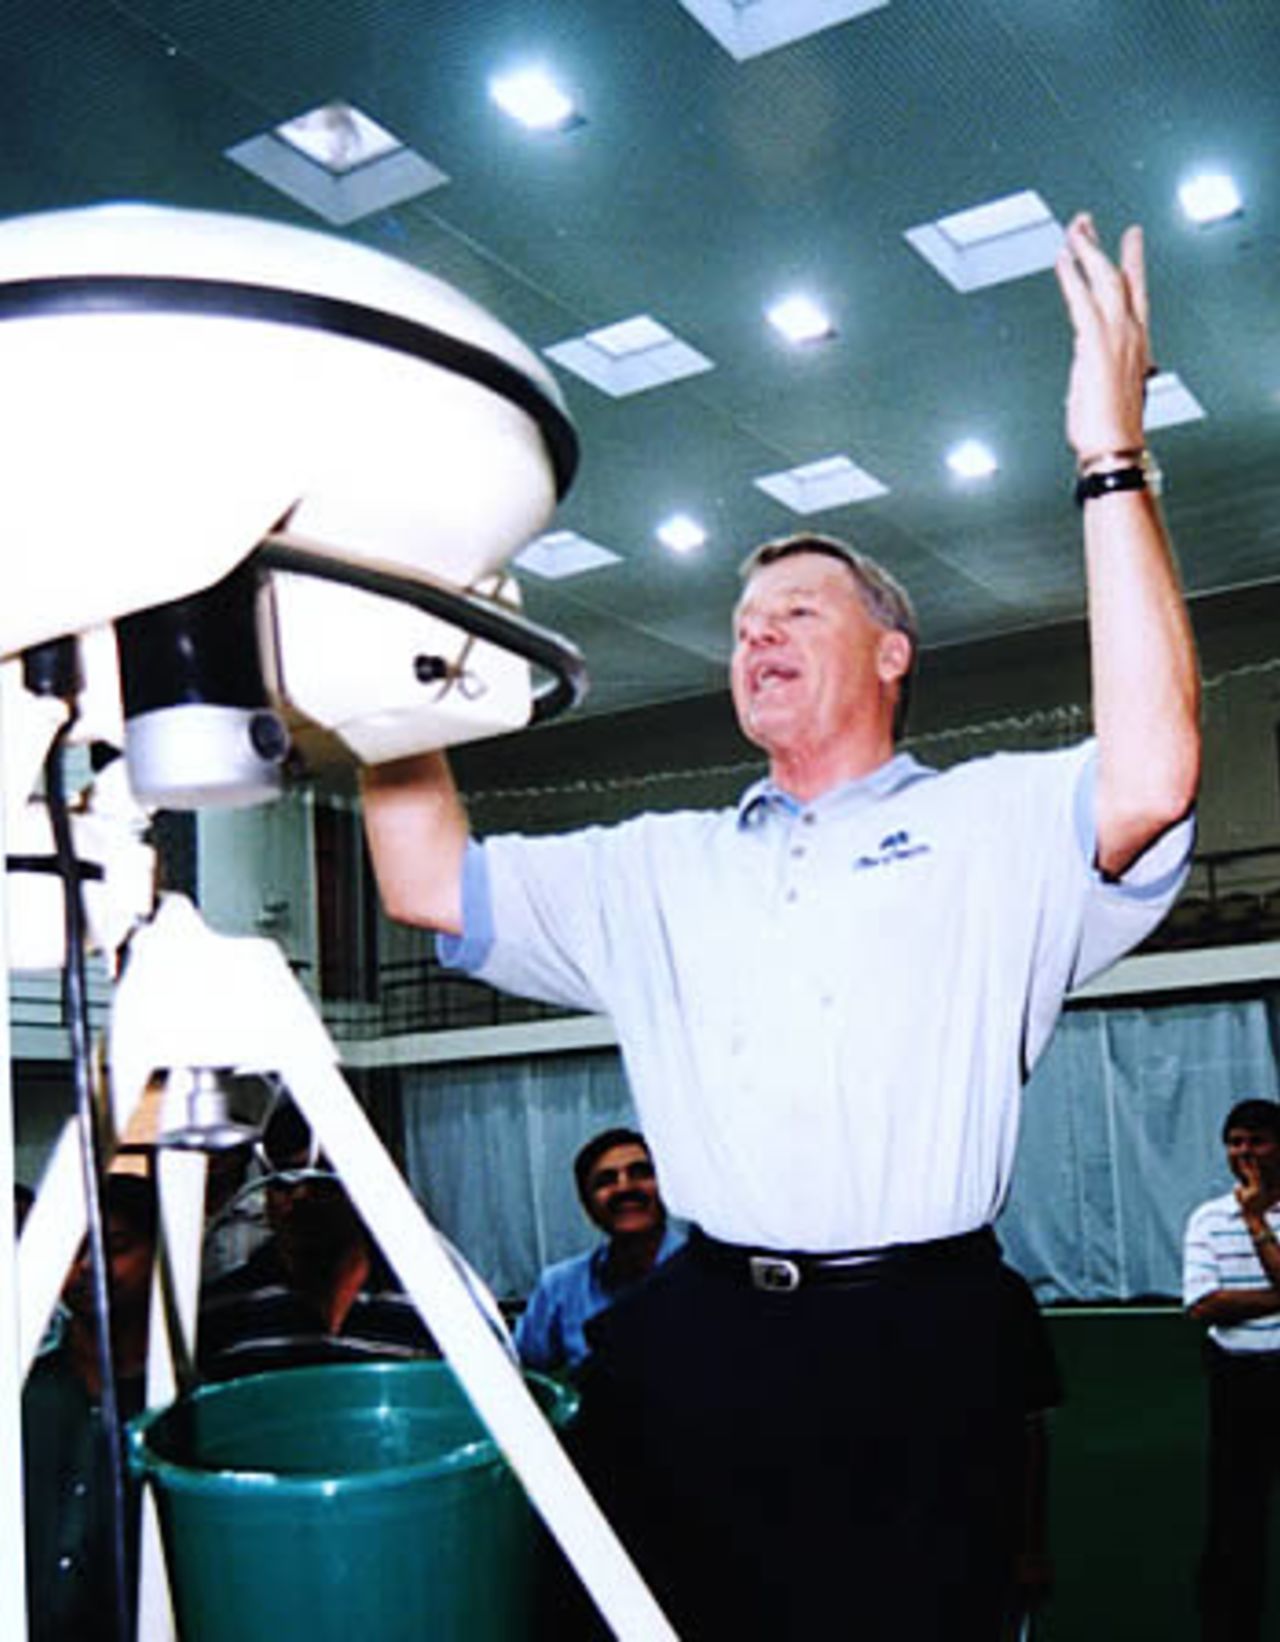 ICC match referee celebrates a clean bowled using a bowling machine at the National Academy, Lahore, September 13, 2003.